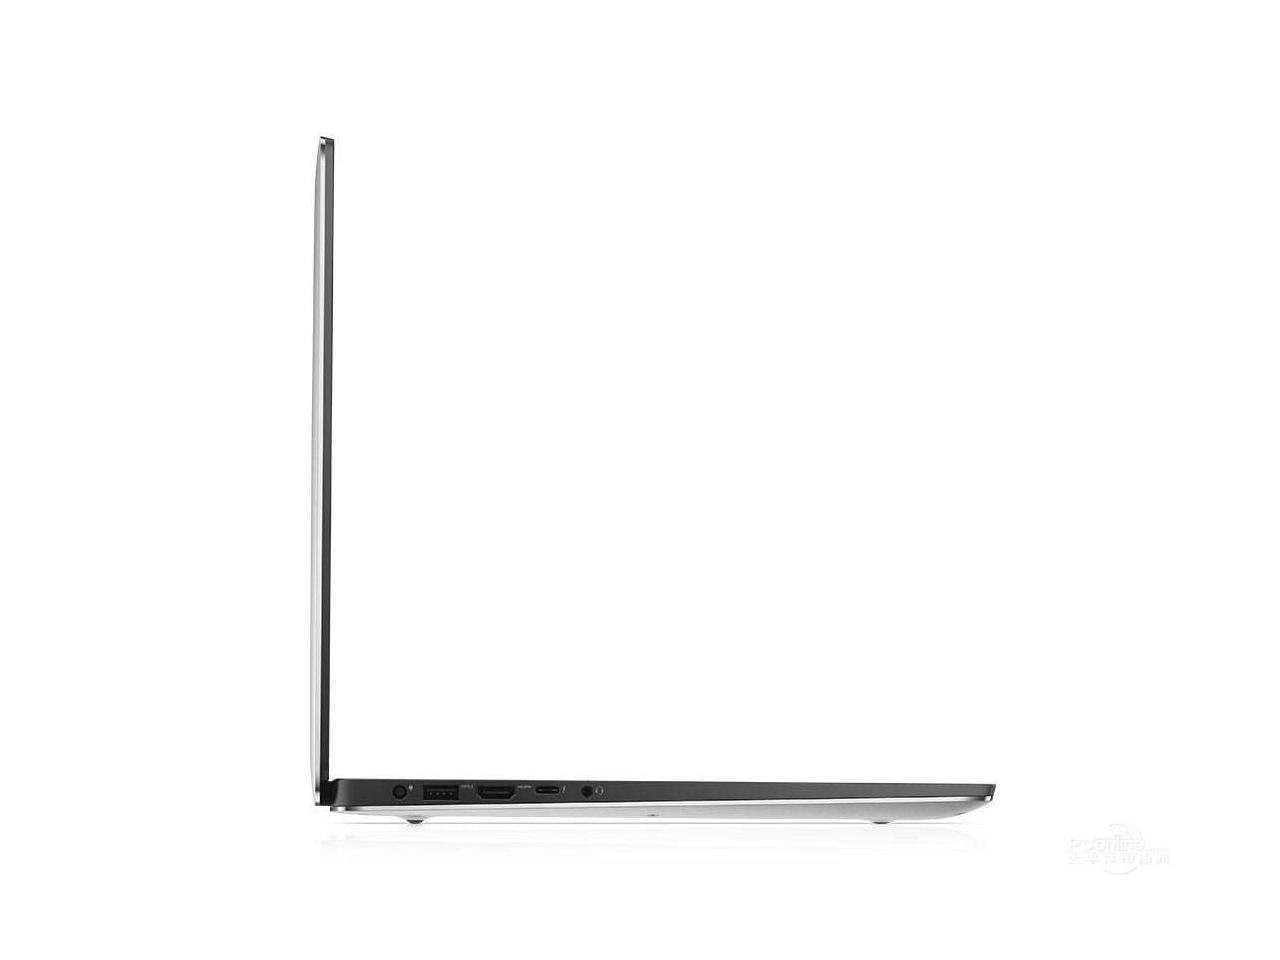 Dell XPS9560 15.6" Ultra Thin and Light Laptop with 4K Touch Display, 7th Gen Core i5 ( up to 3.5 GHz), 8GB, 256GB SSD, Nvidia Gaming GTX 1050, Aluminum Chassis,windows 10